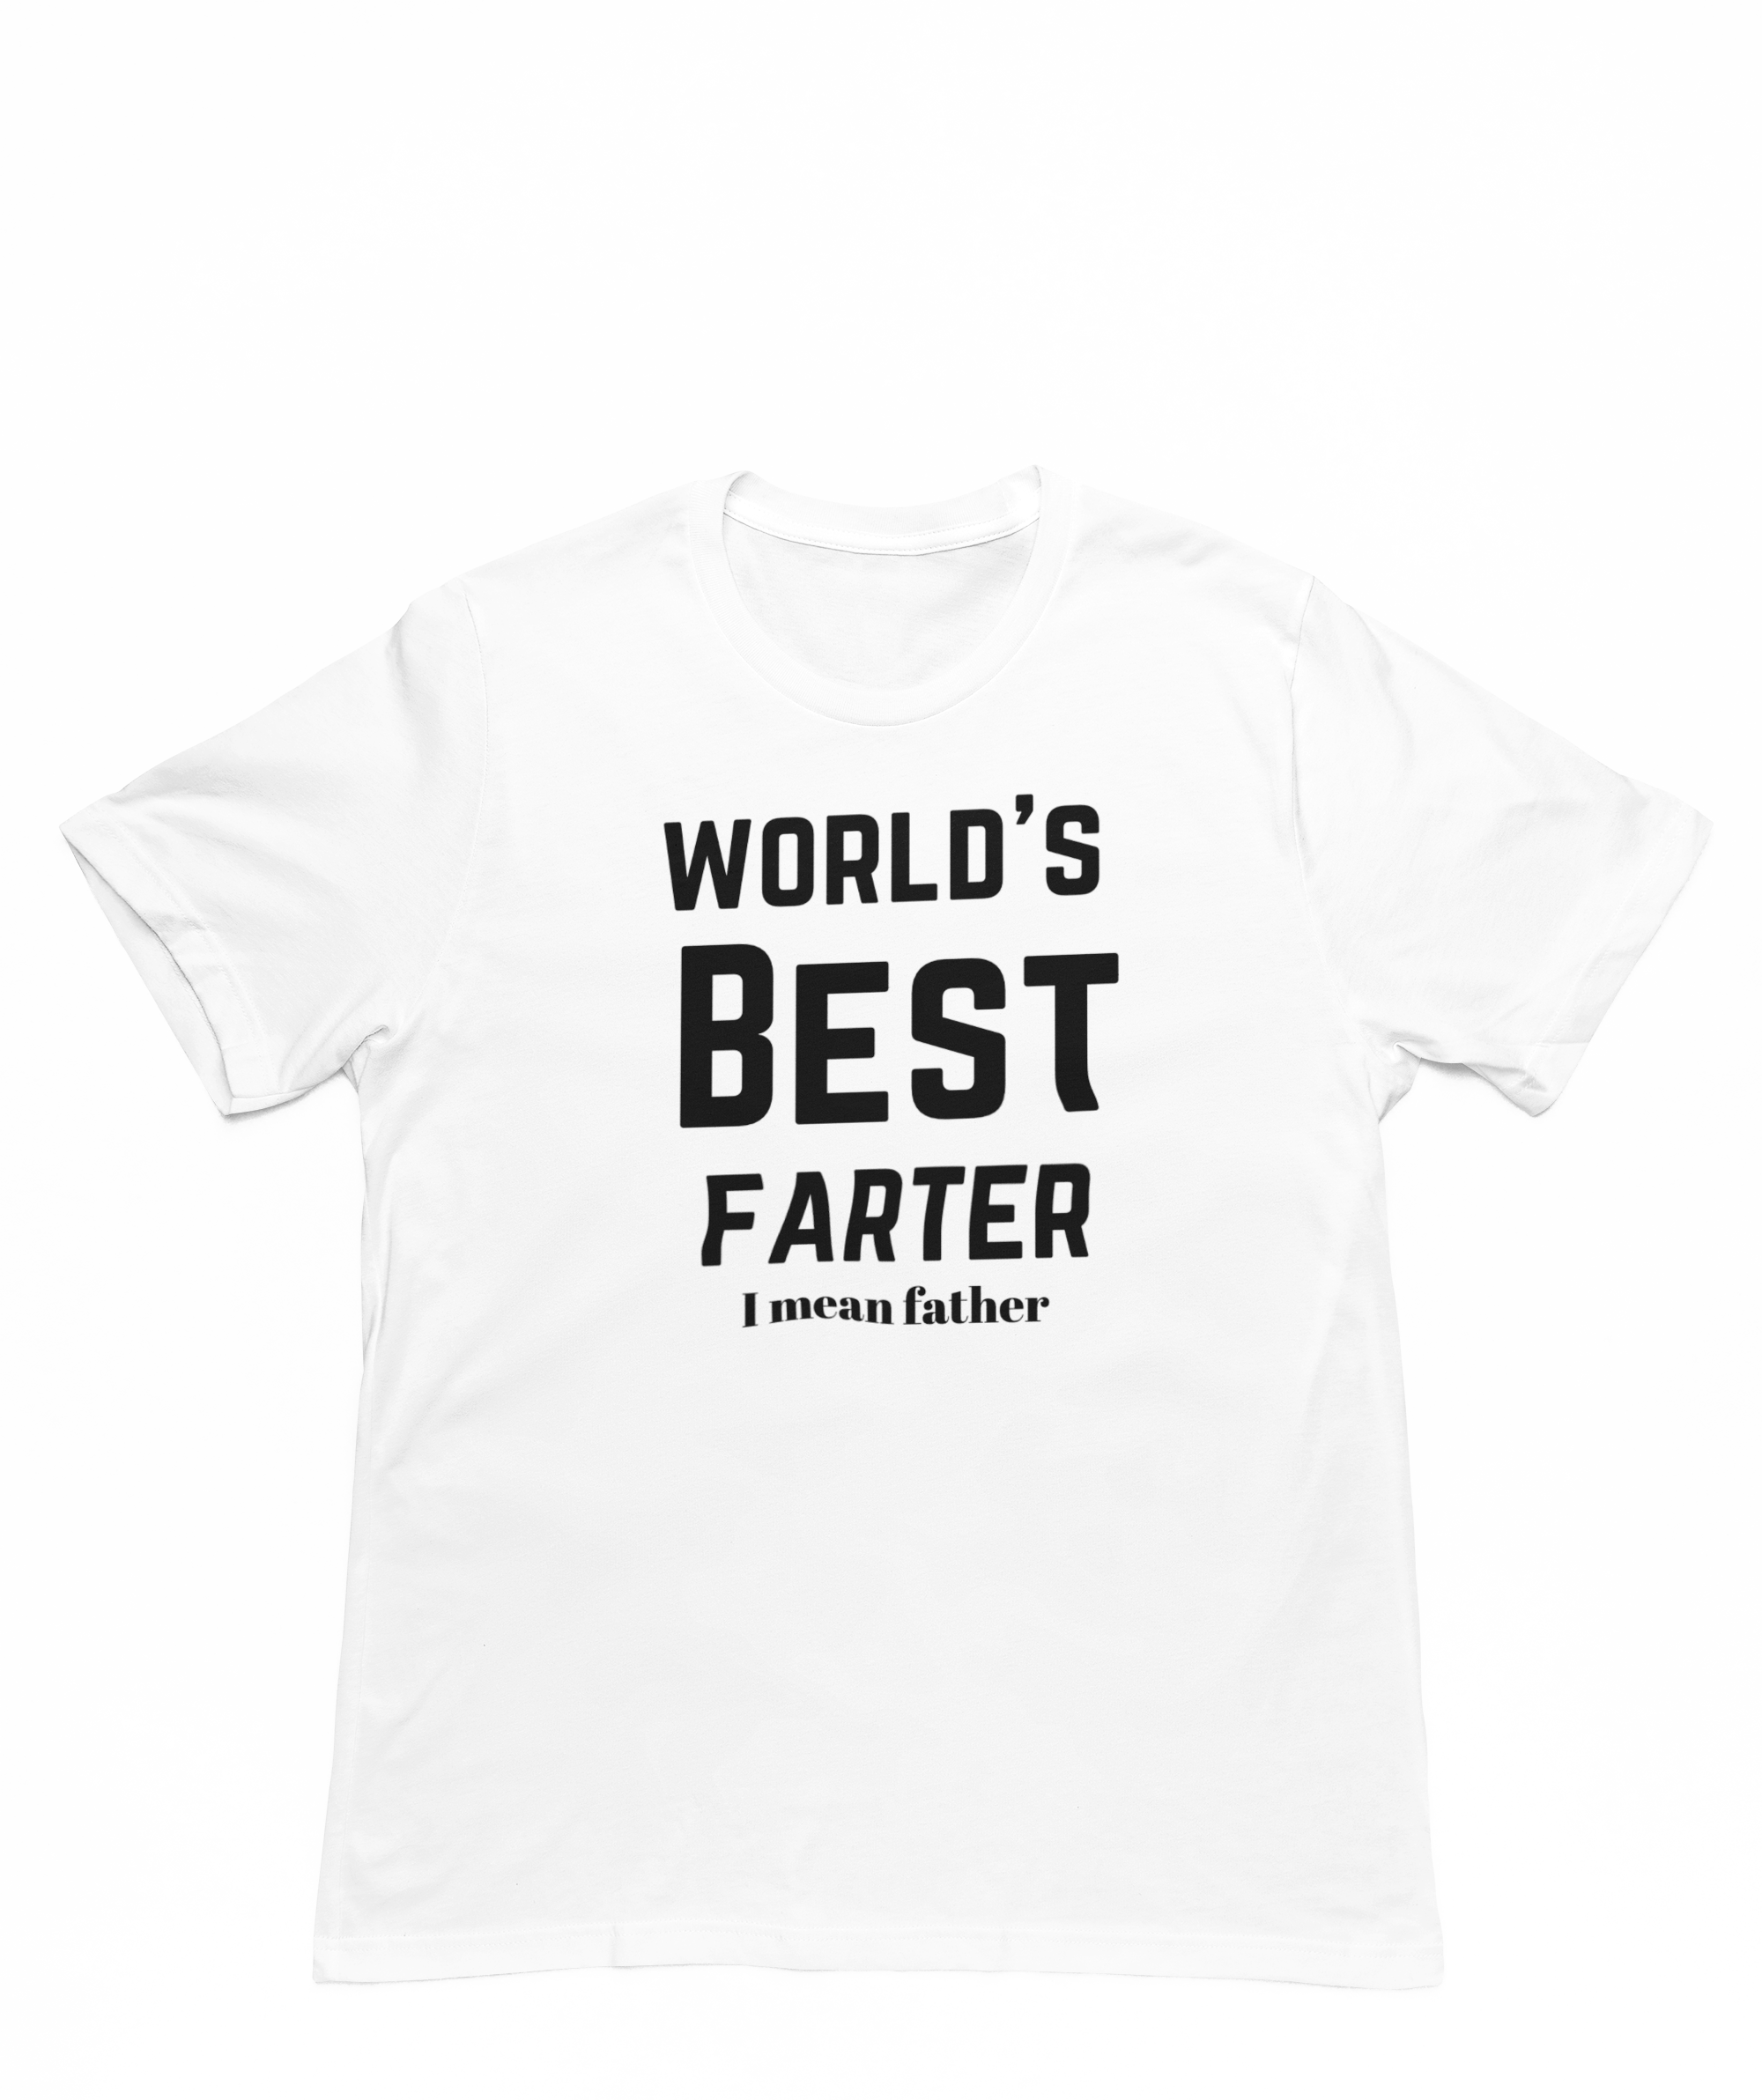 Worlds Best Farter  t-shirt - Father's Day gift